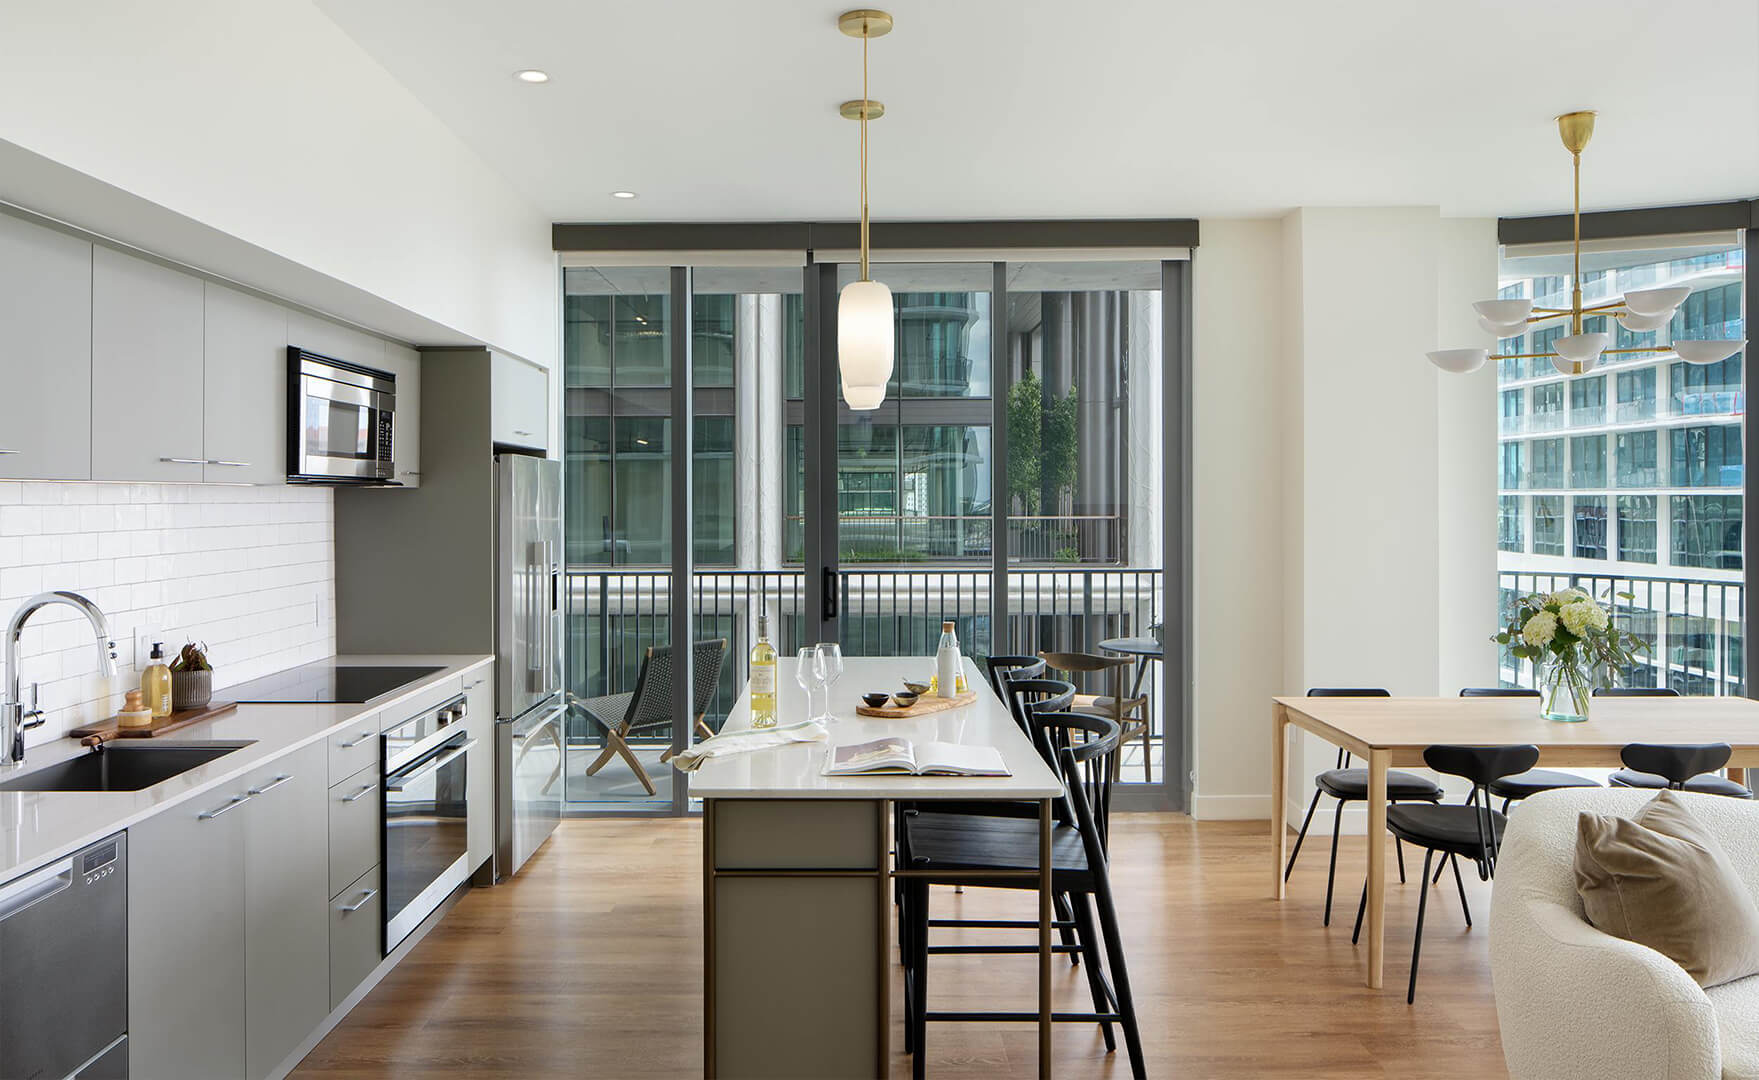 Open living space with kitchen and dining, looking towards large windows and balcony.